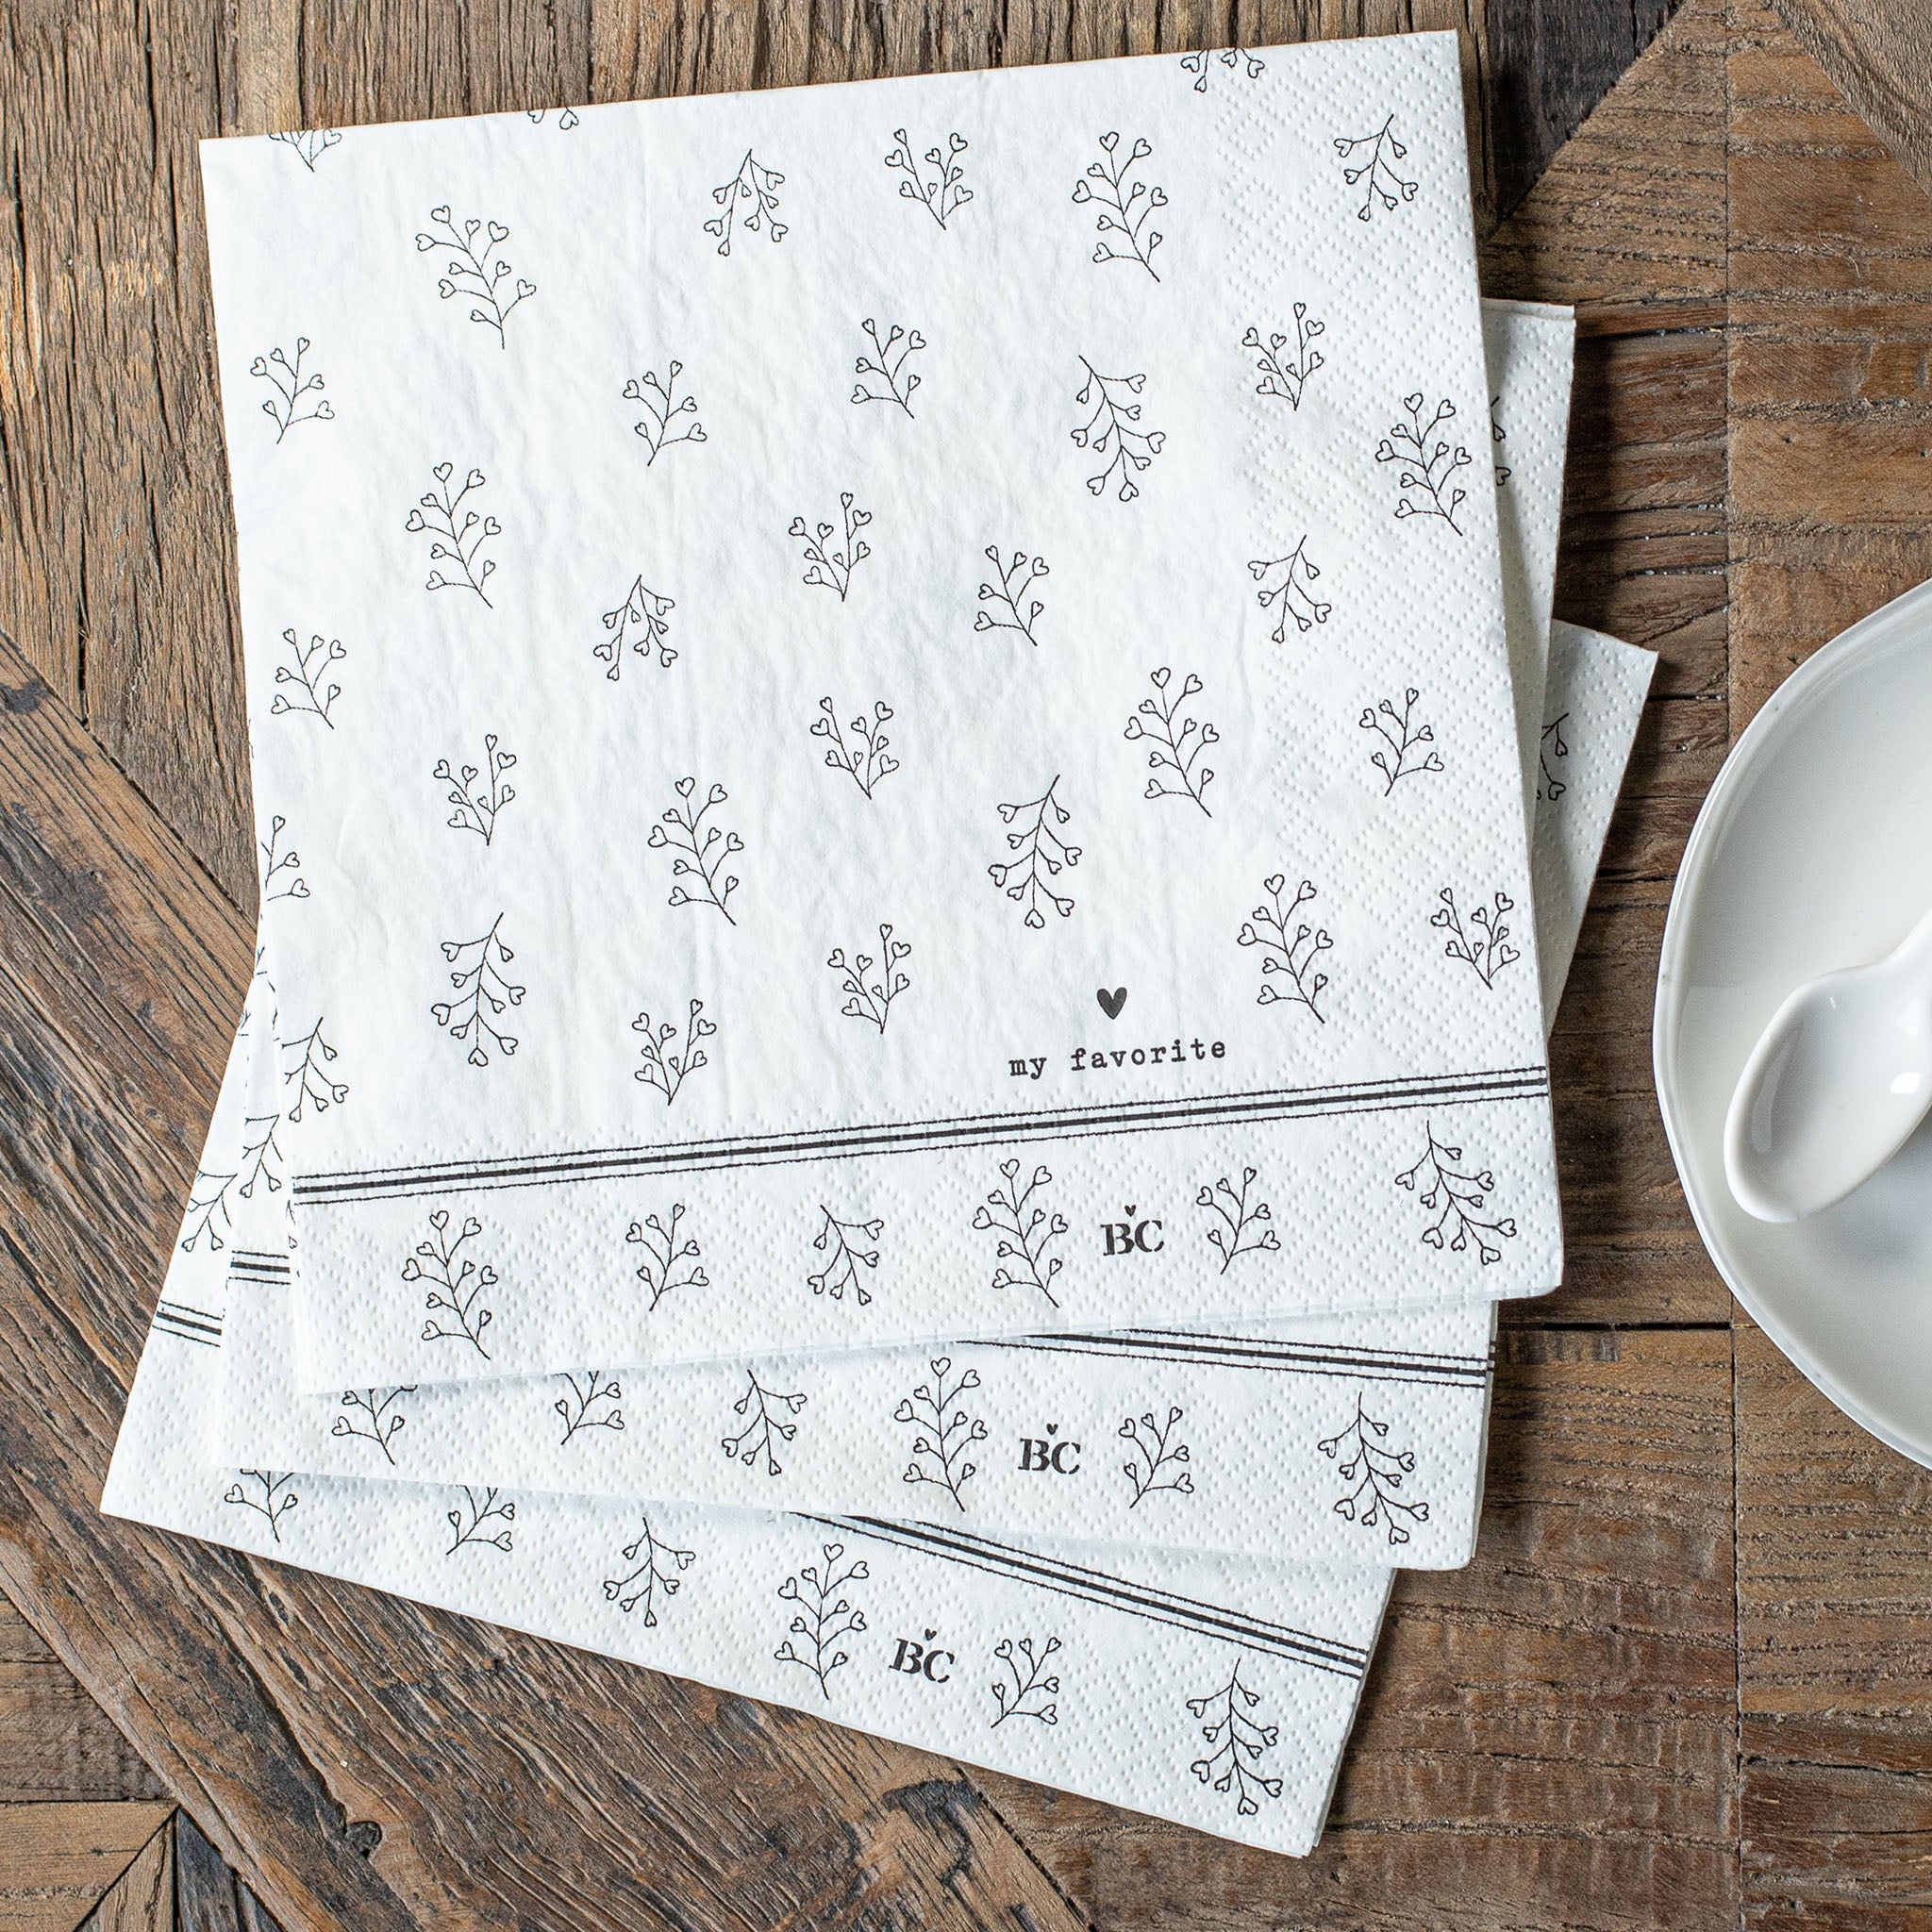 Napkins with black flowers